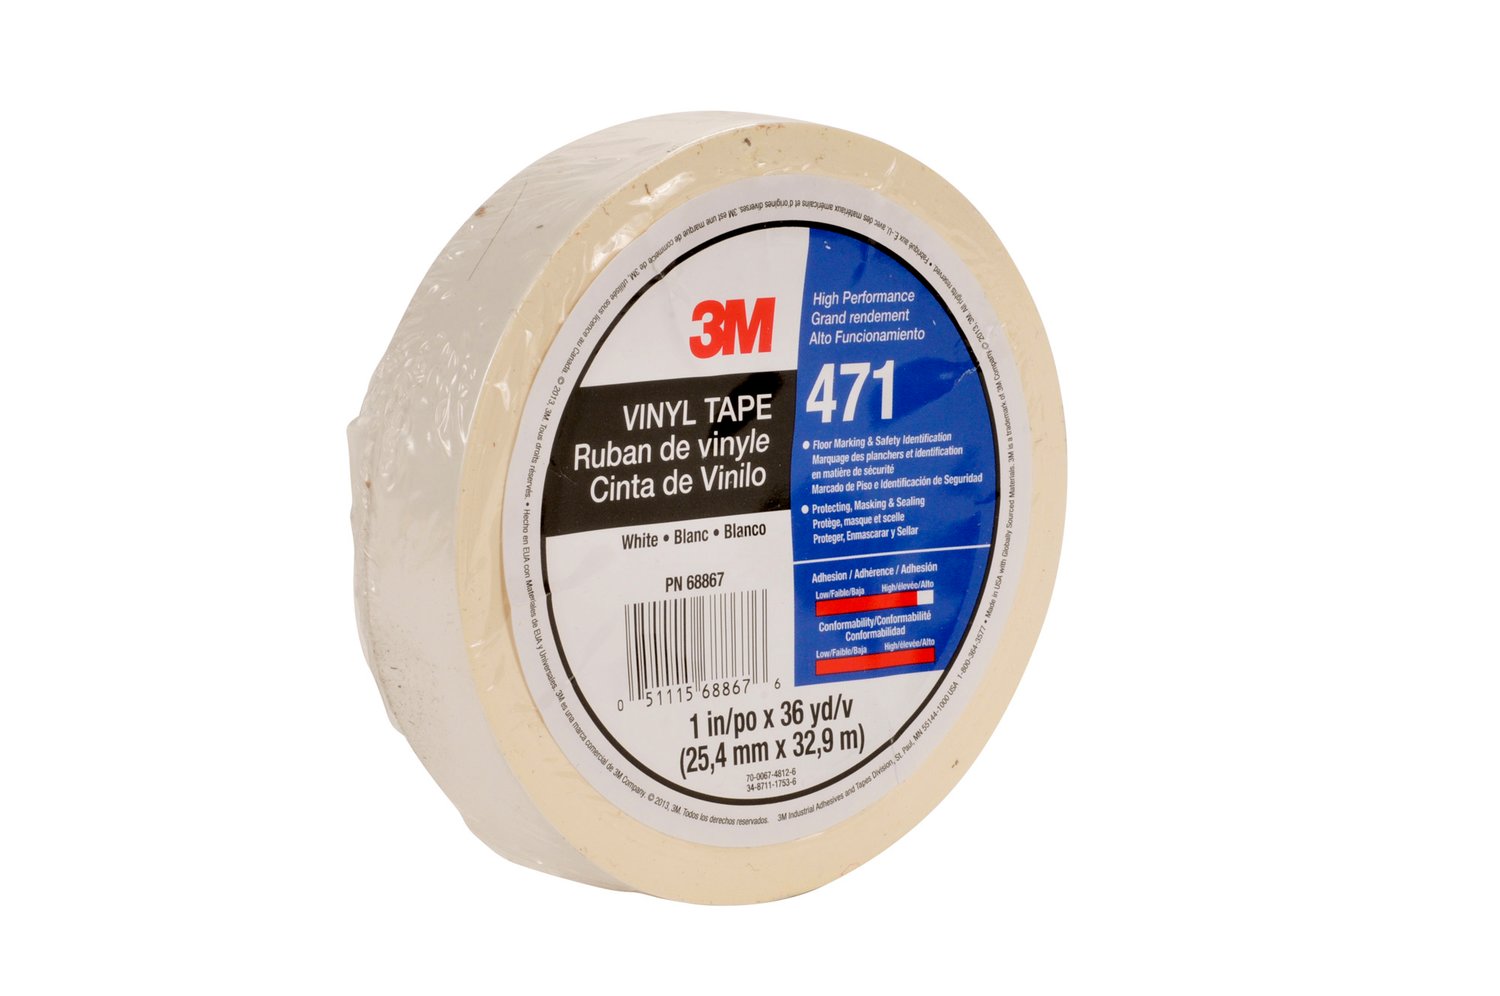 7100049357 - 3M Vinyl Tape 471, White, 1 1/2 in x 36 yd, 5.2 mil, 24 rolls per case,
Individually Wrapped Conveniently Packaged